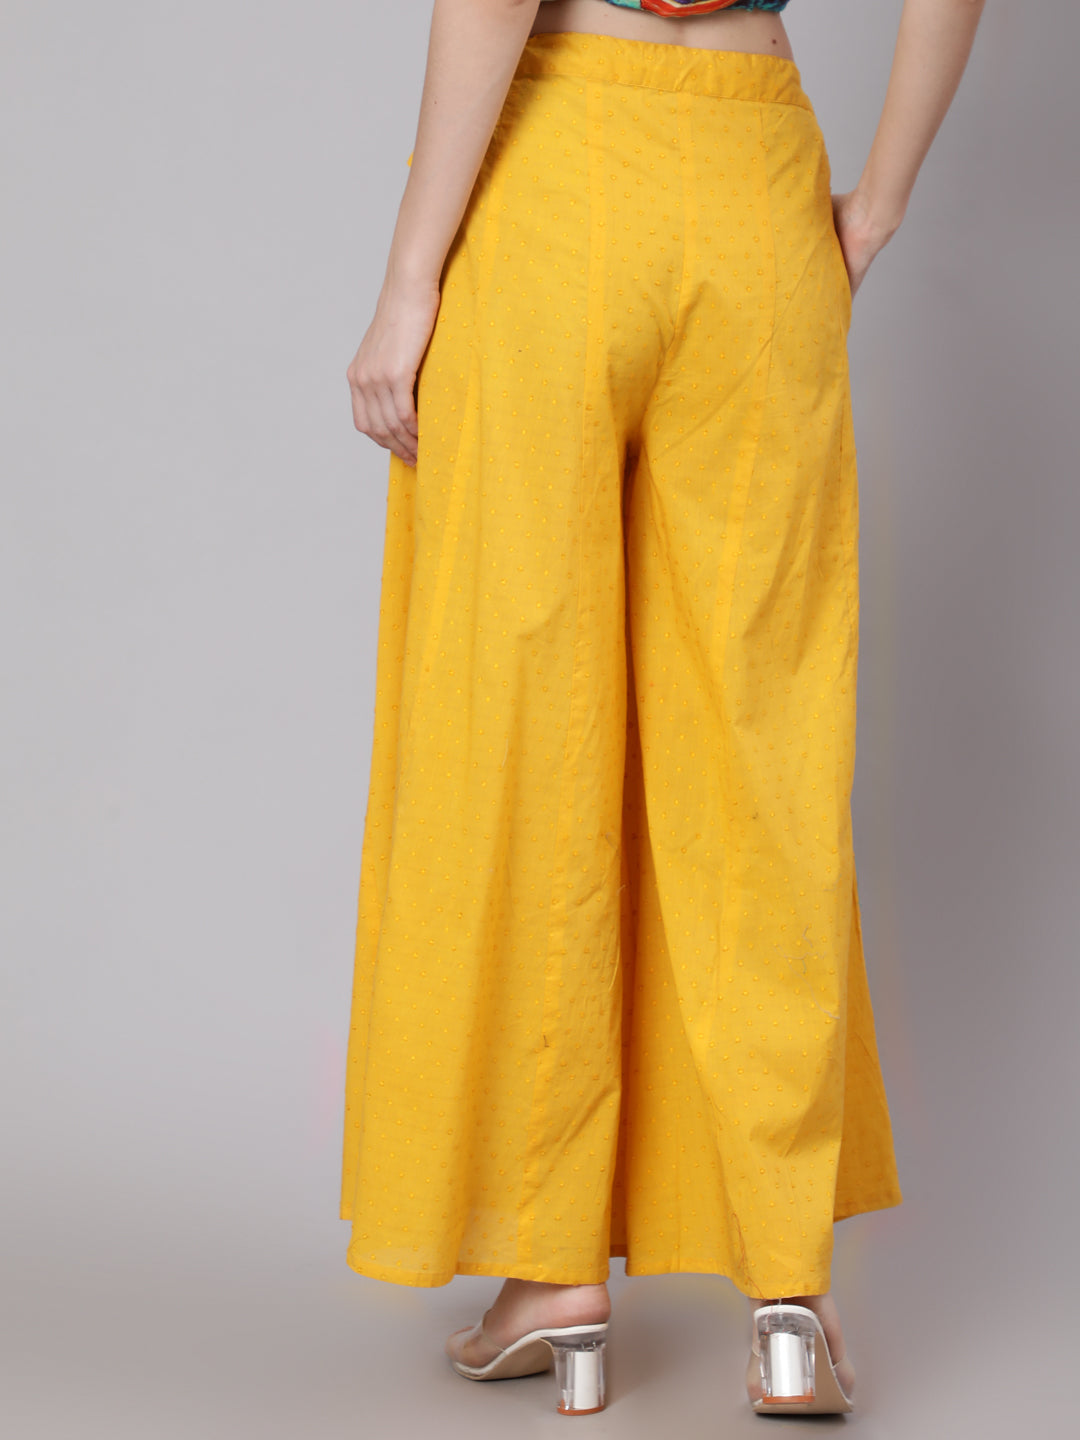 Women's Yellow Ankle-Length Flared Palazzo - Aks